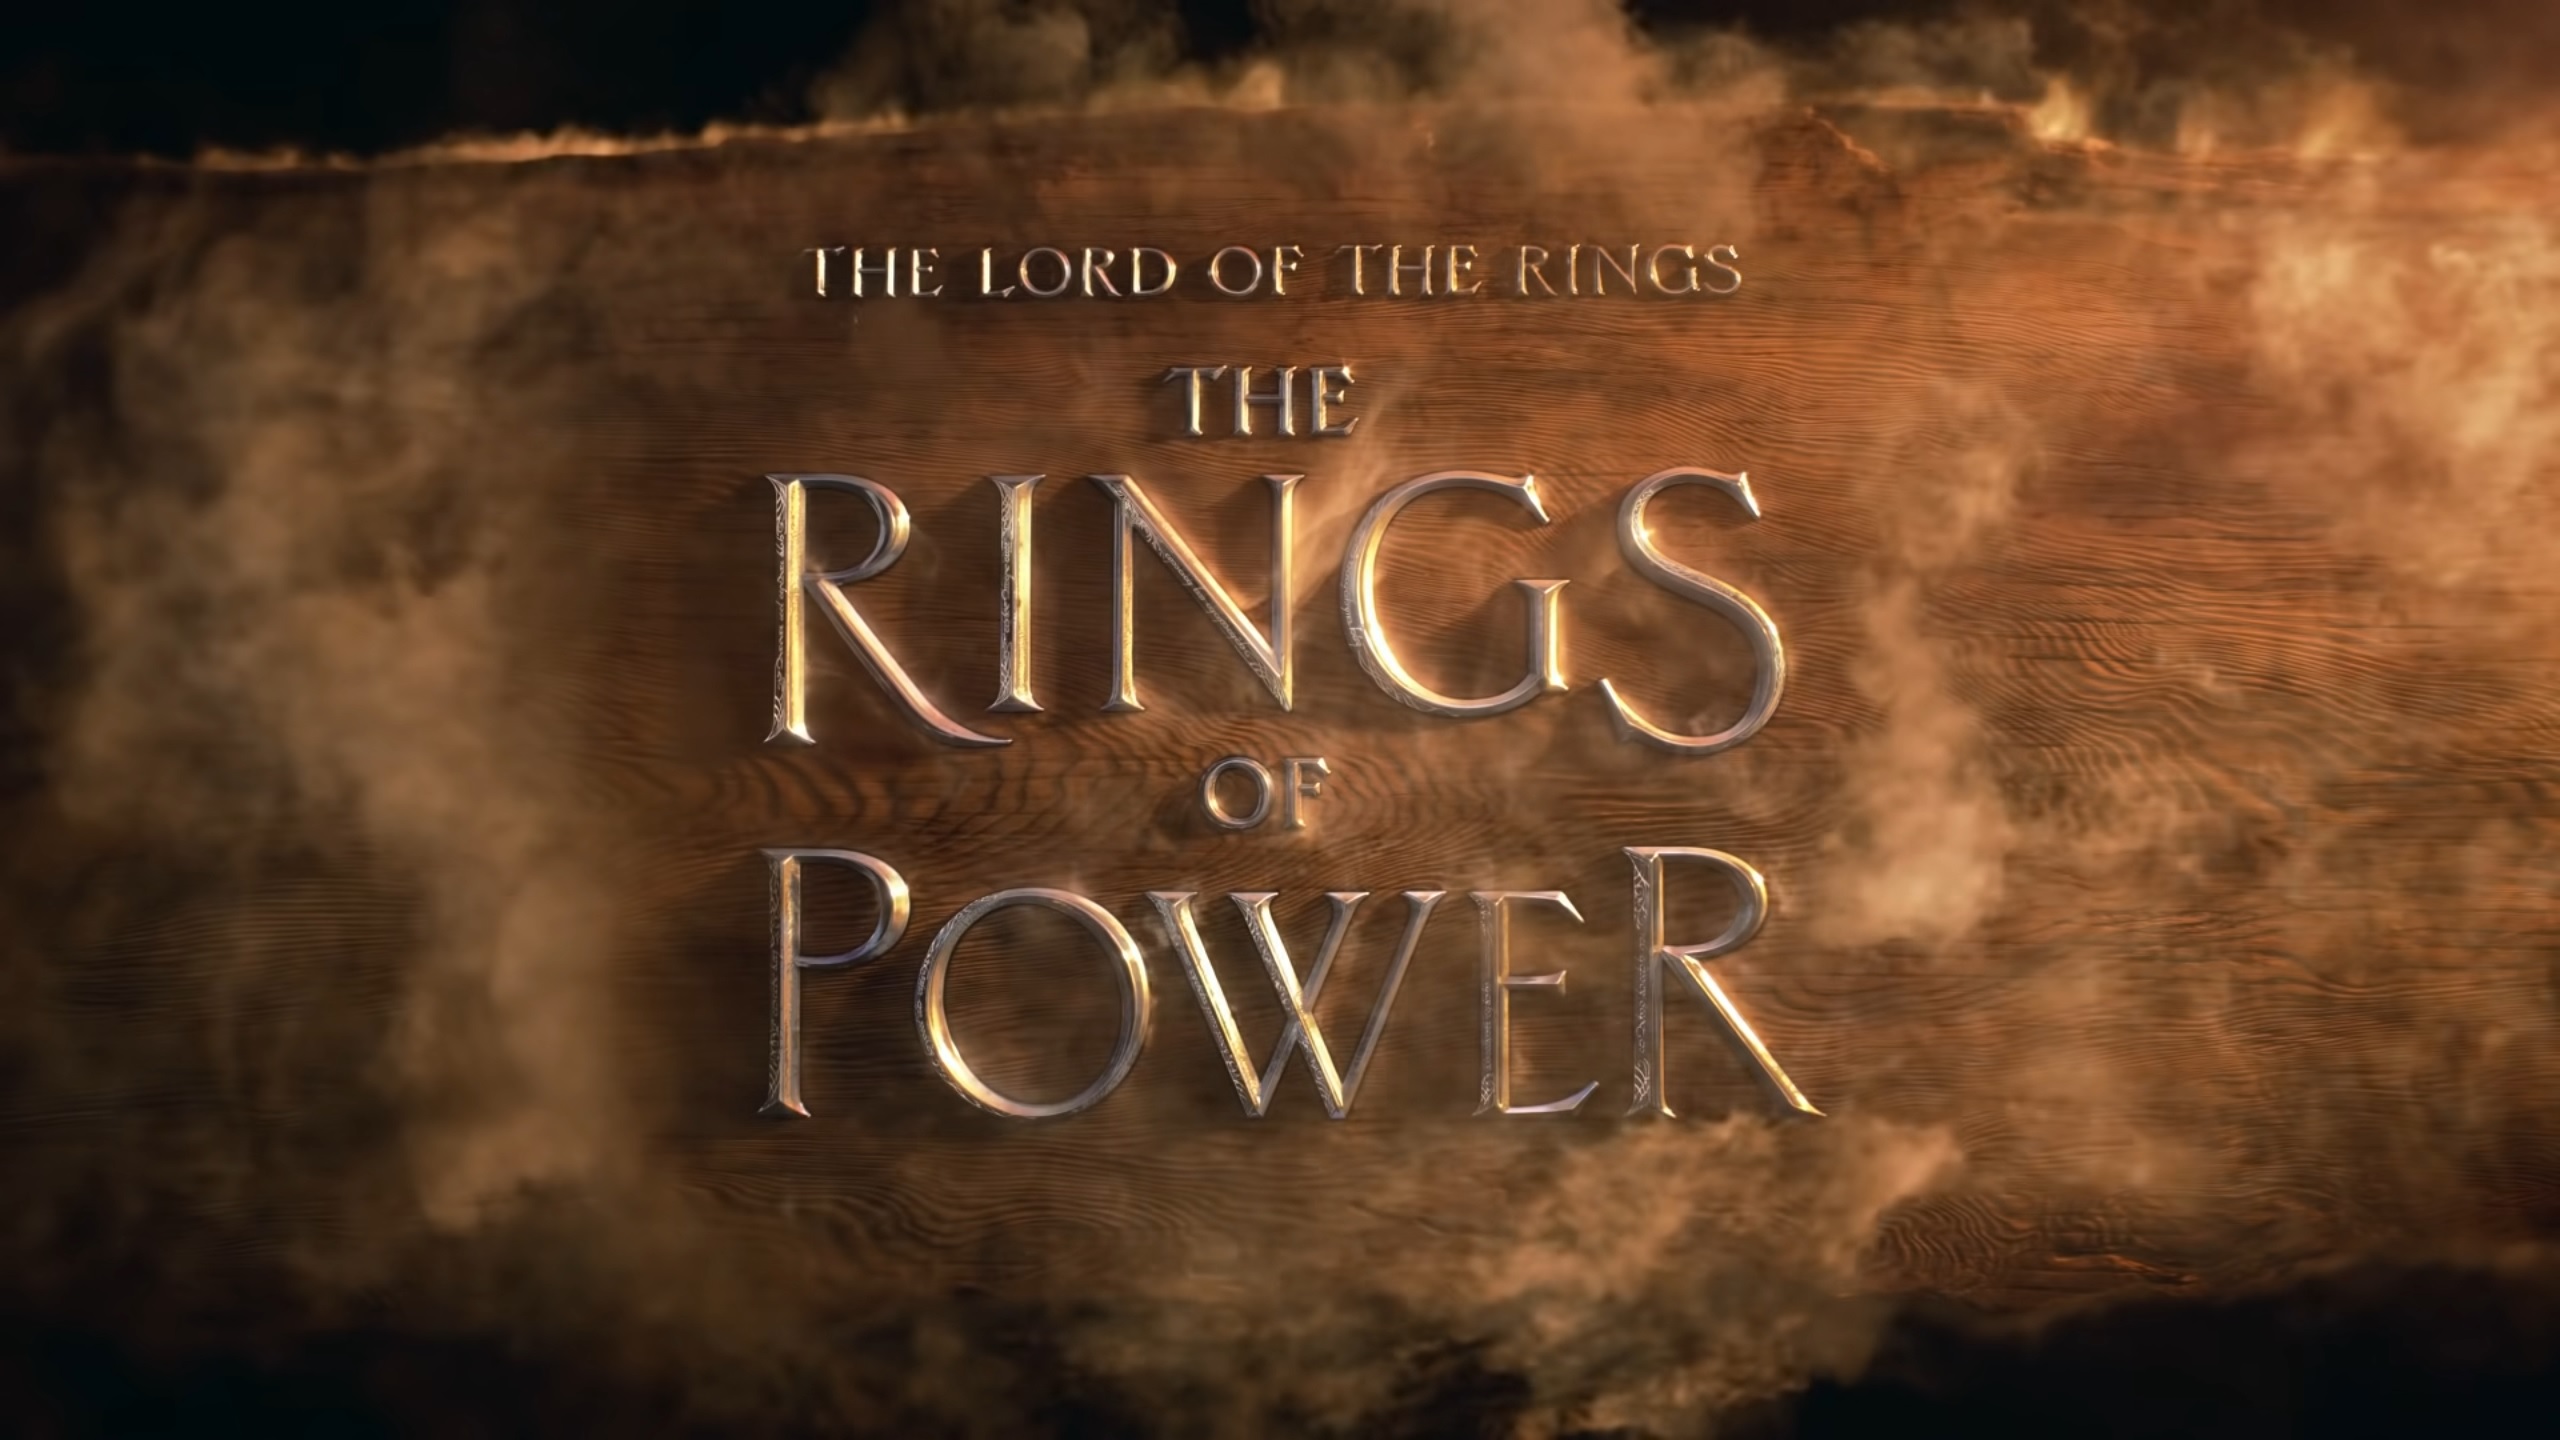 The first trailer for Amazon’s Lord of the Rings is now available